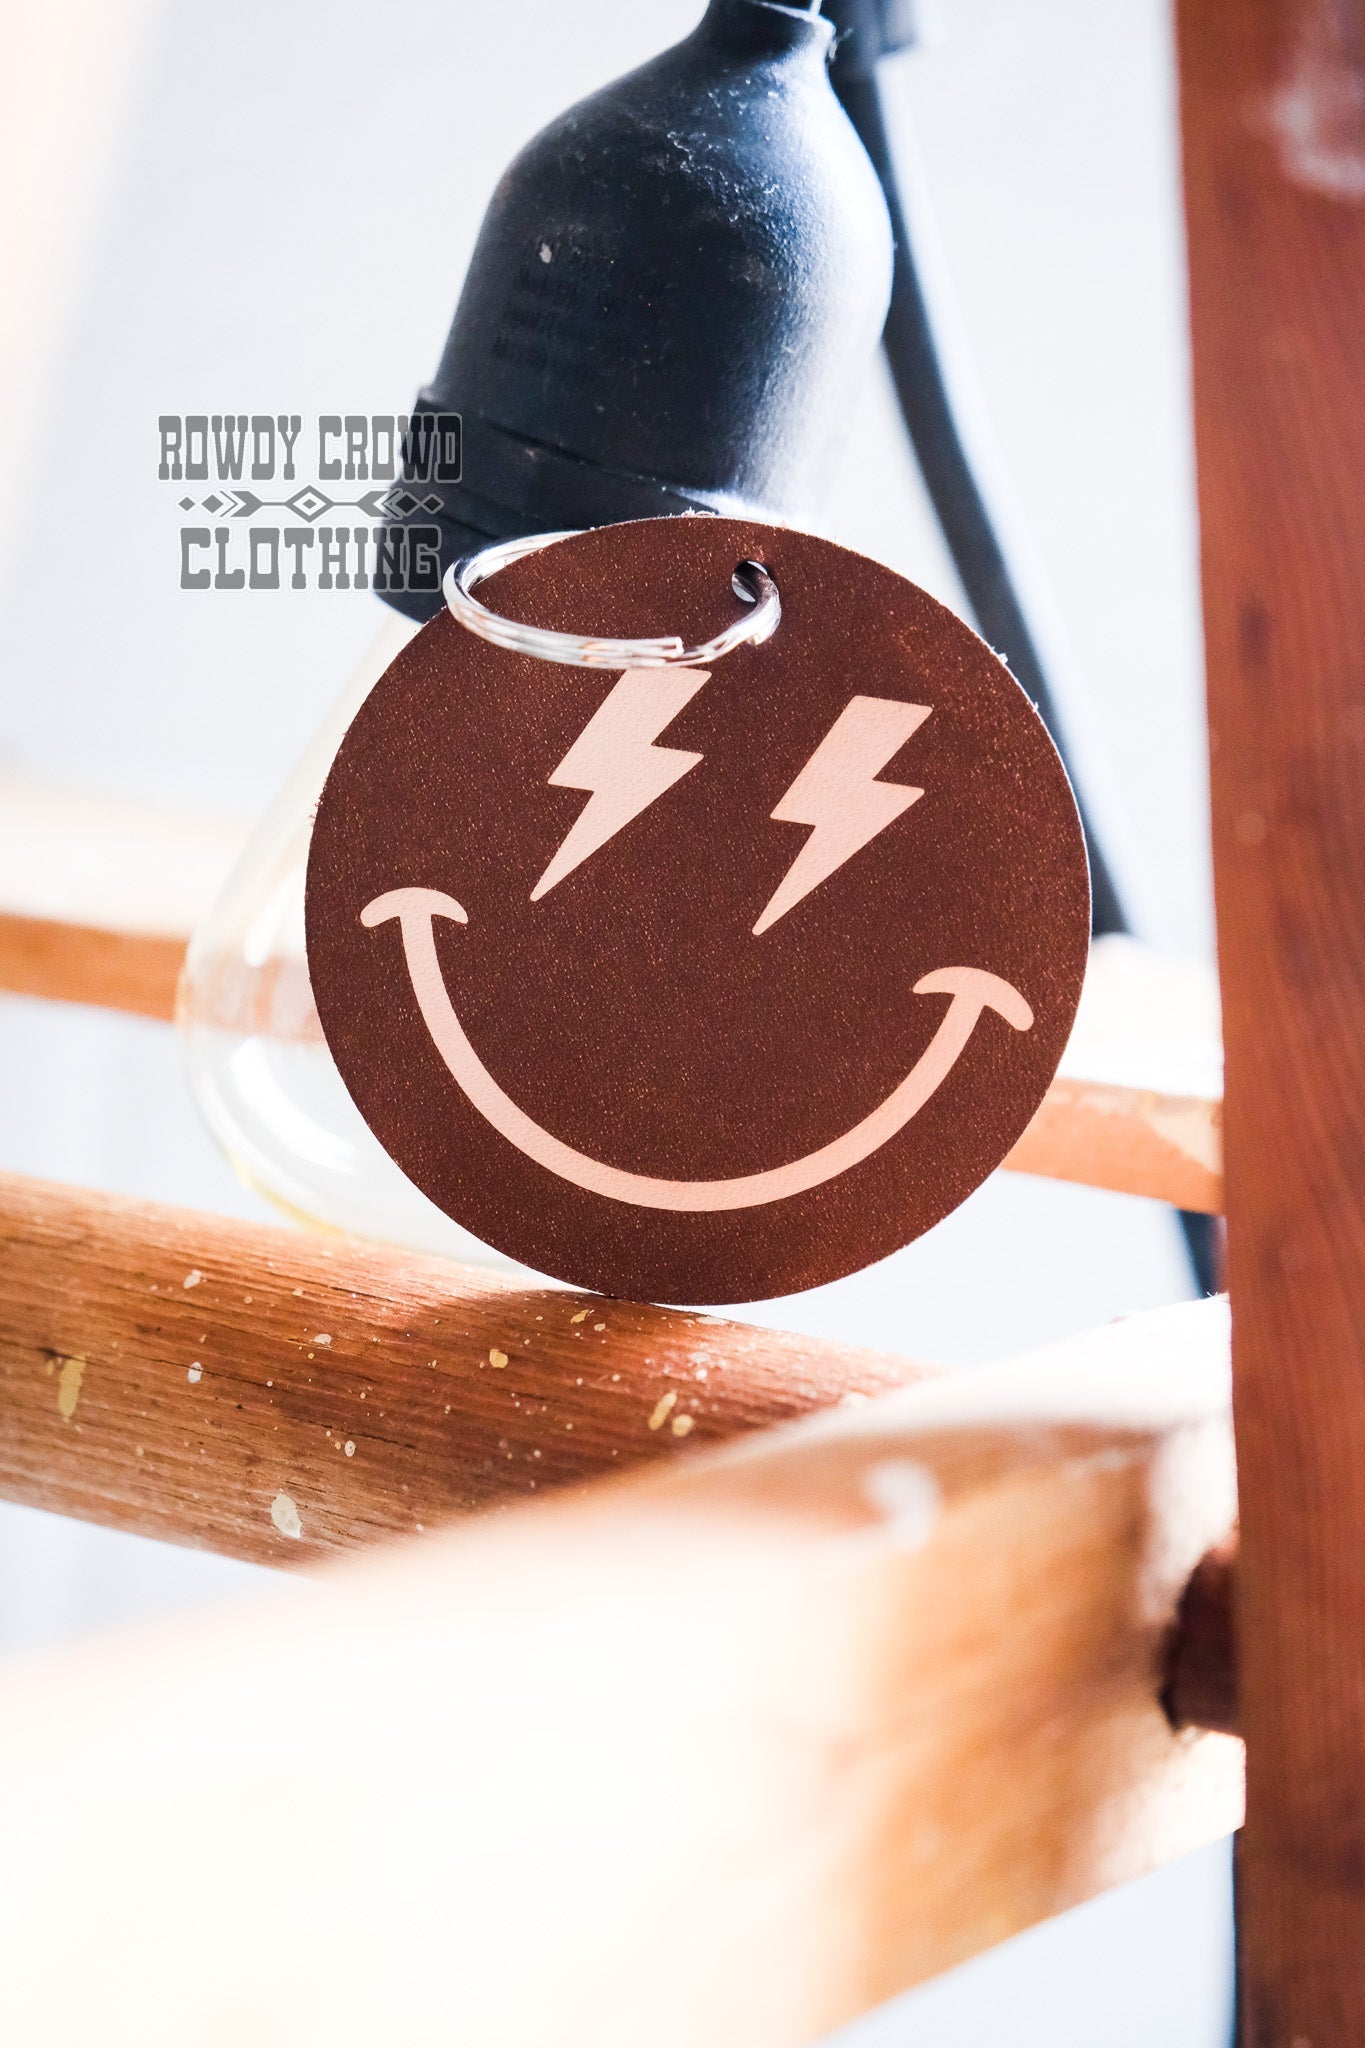 western keychains, western accessories, leather keychain, western accessories, western car accessories, western wholesale, western wholesale accessories, keychains, smiley face keychain, smiley face with lightning bolts